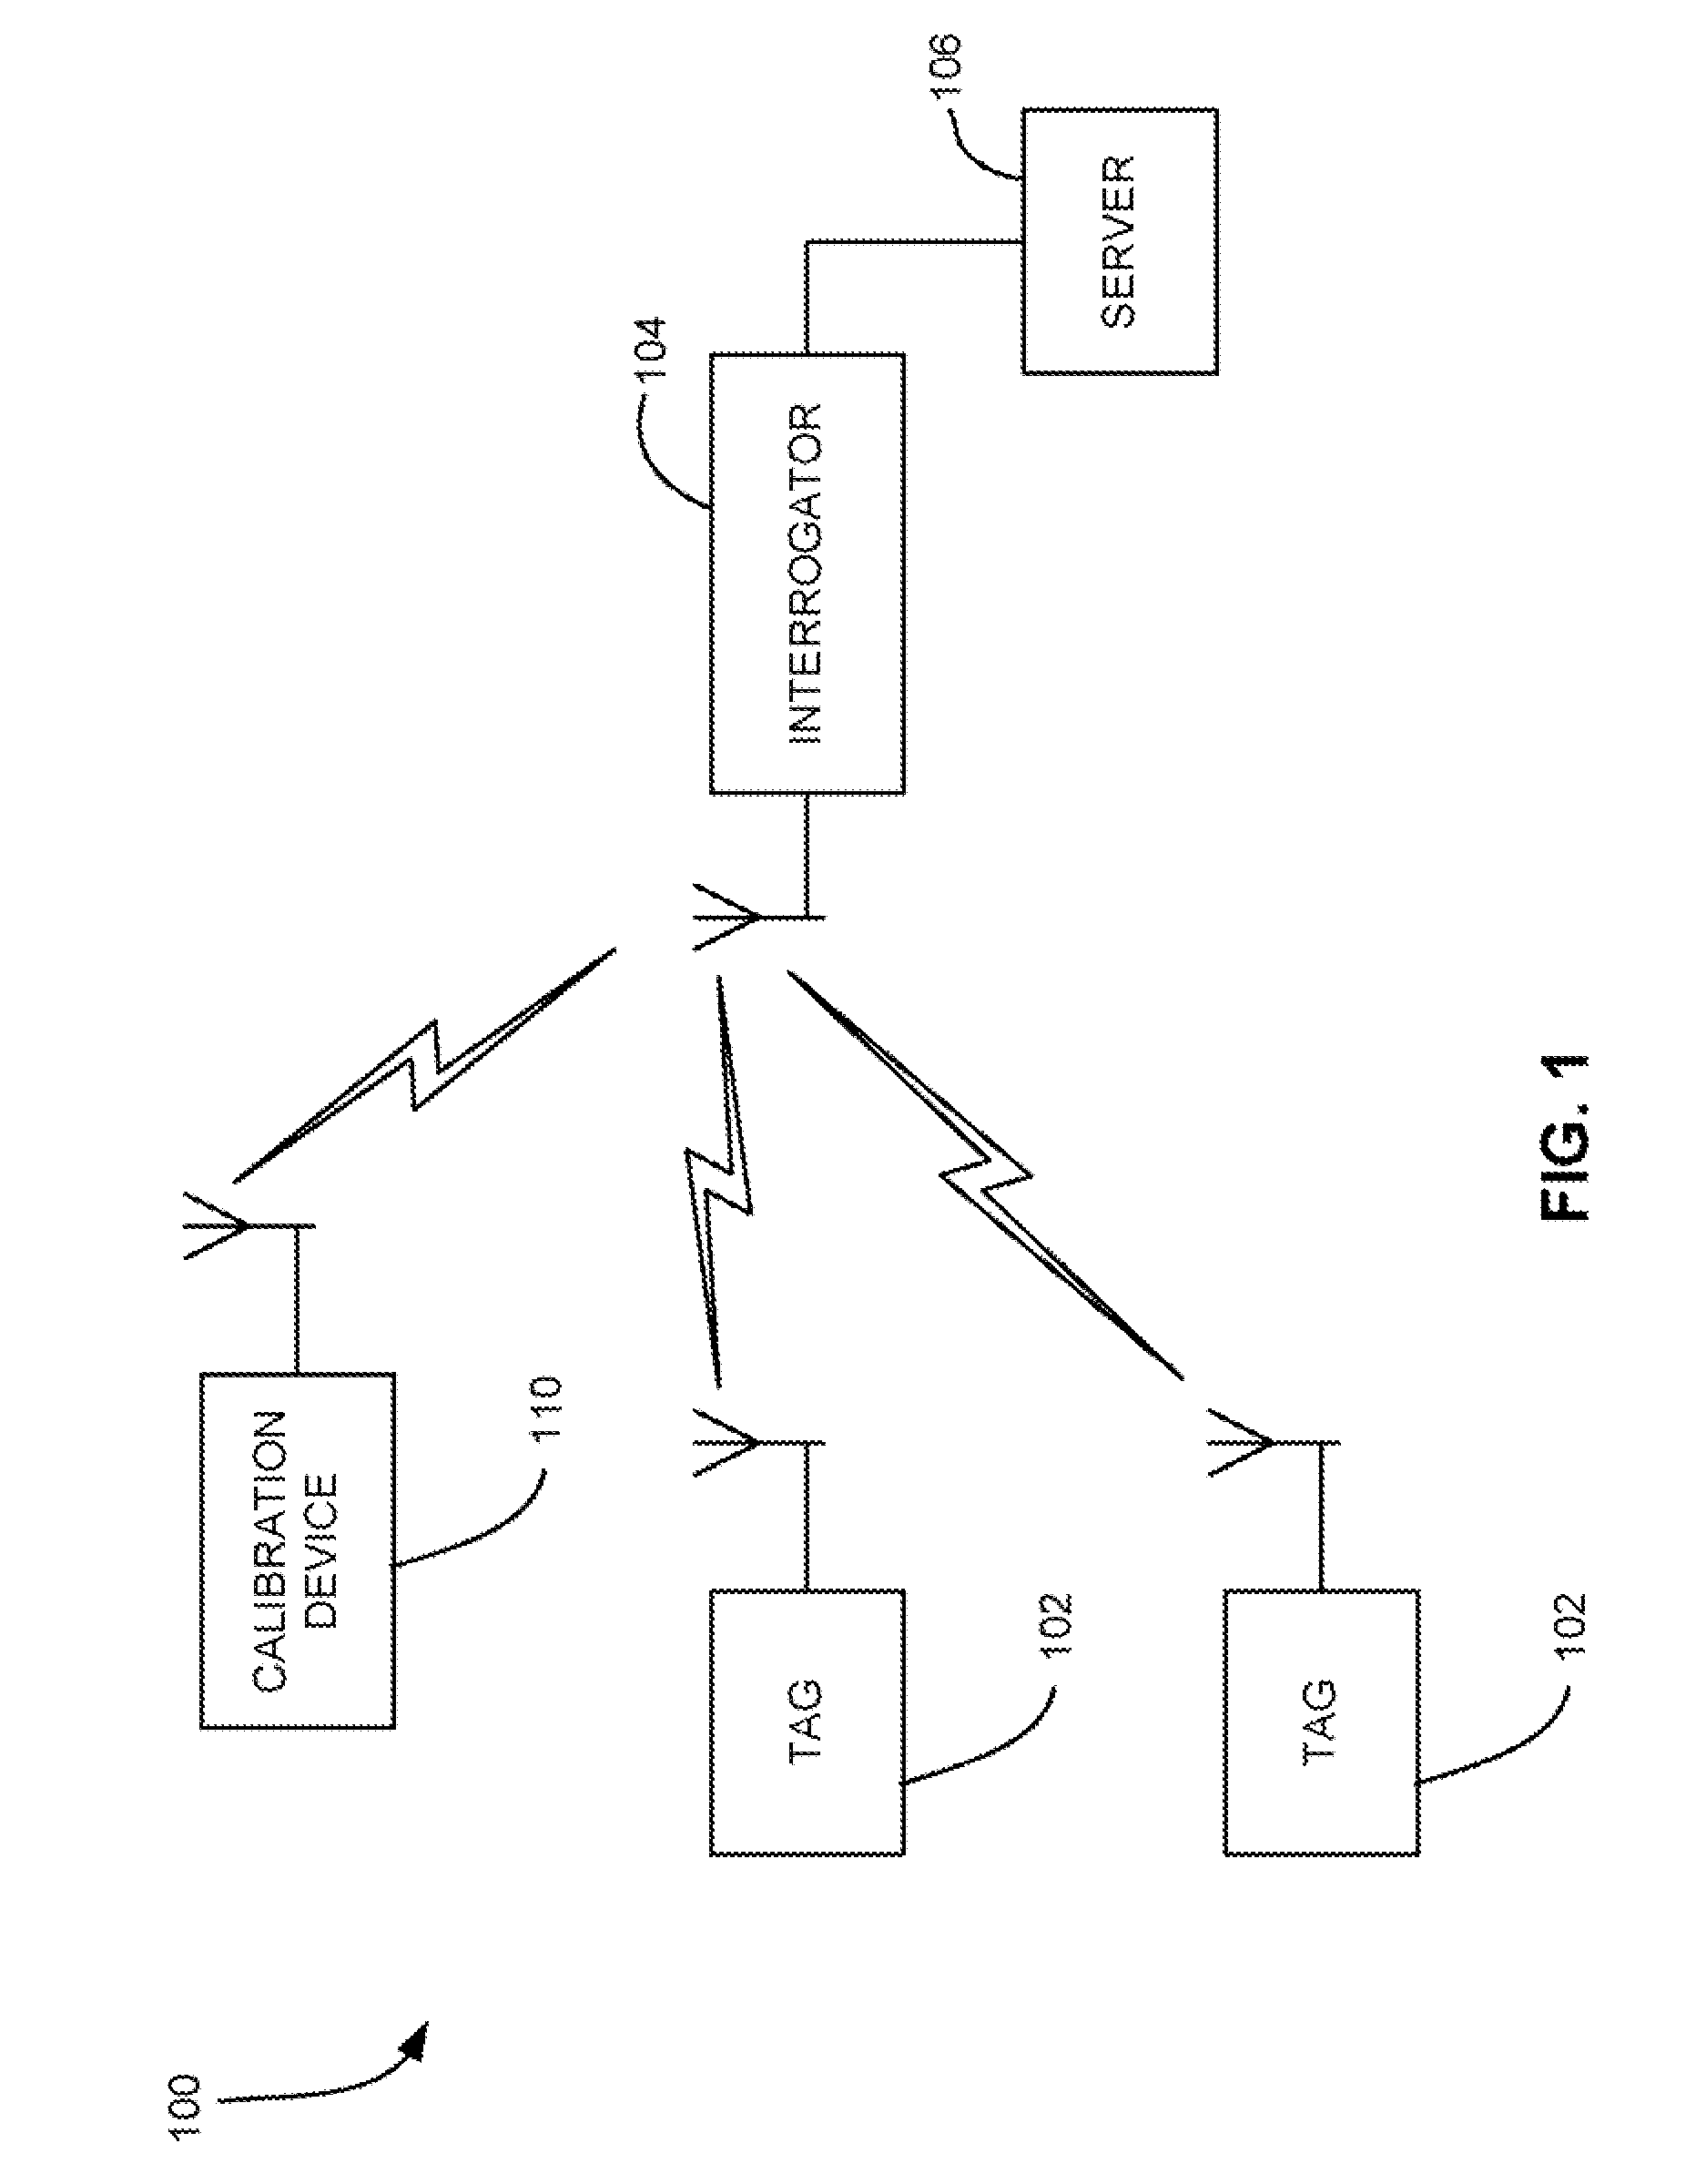 RF device comparing DAC output to incoming signal for selectively performing an action